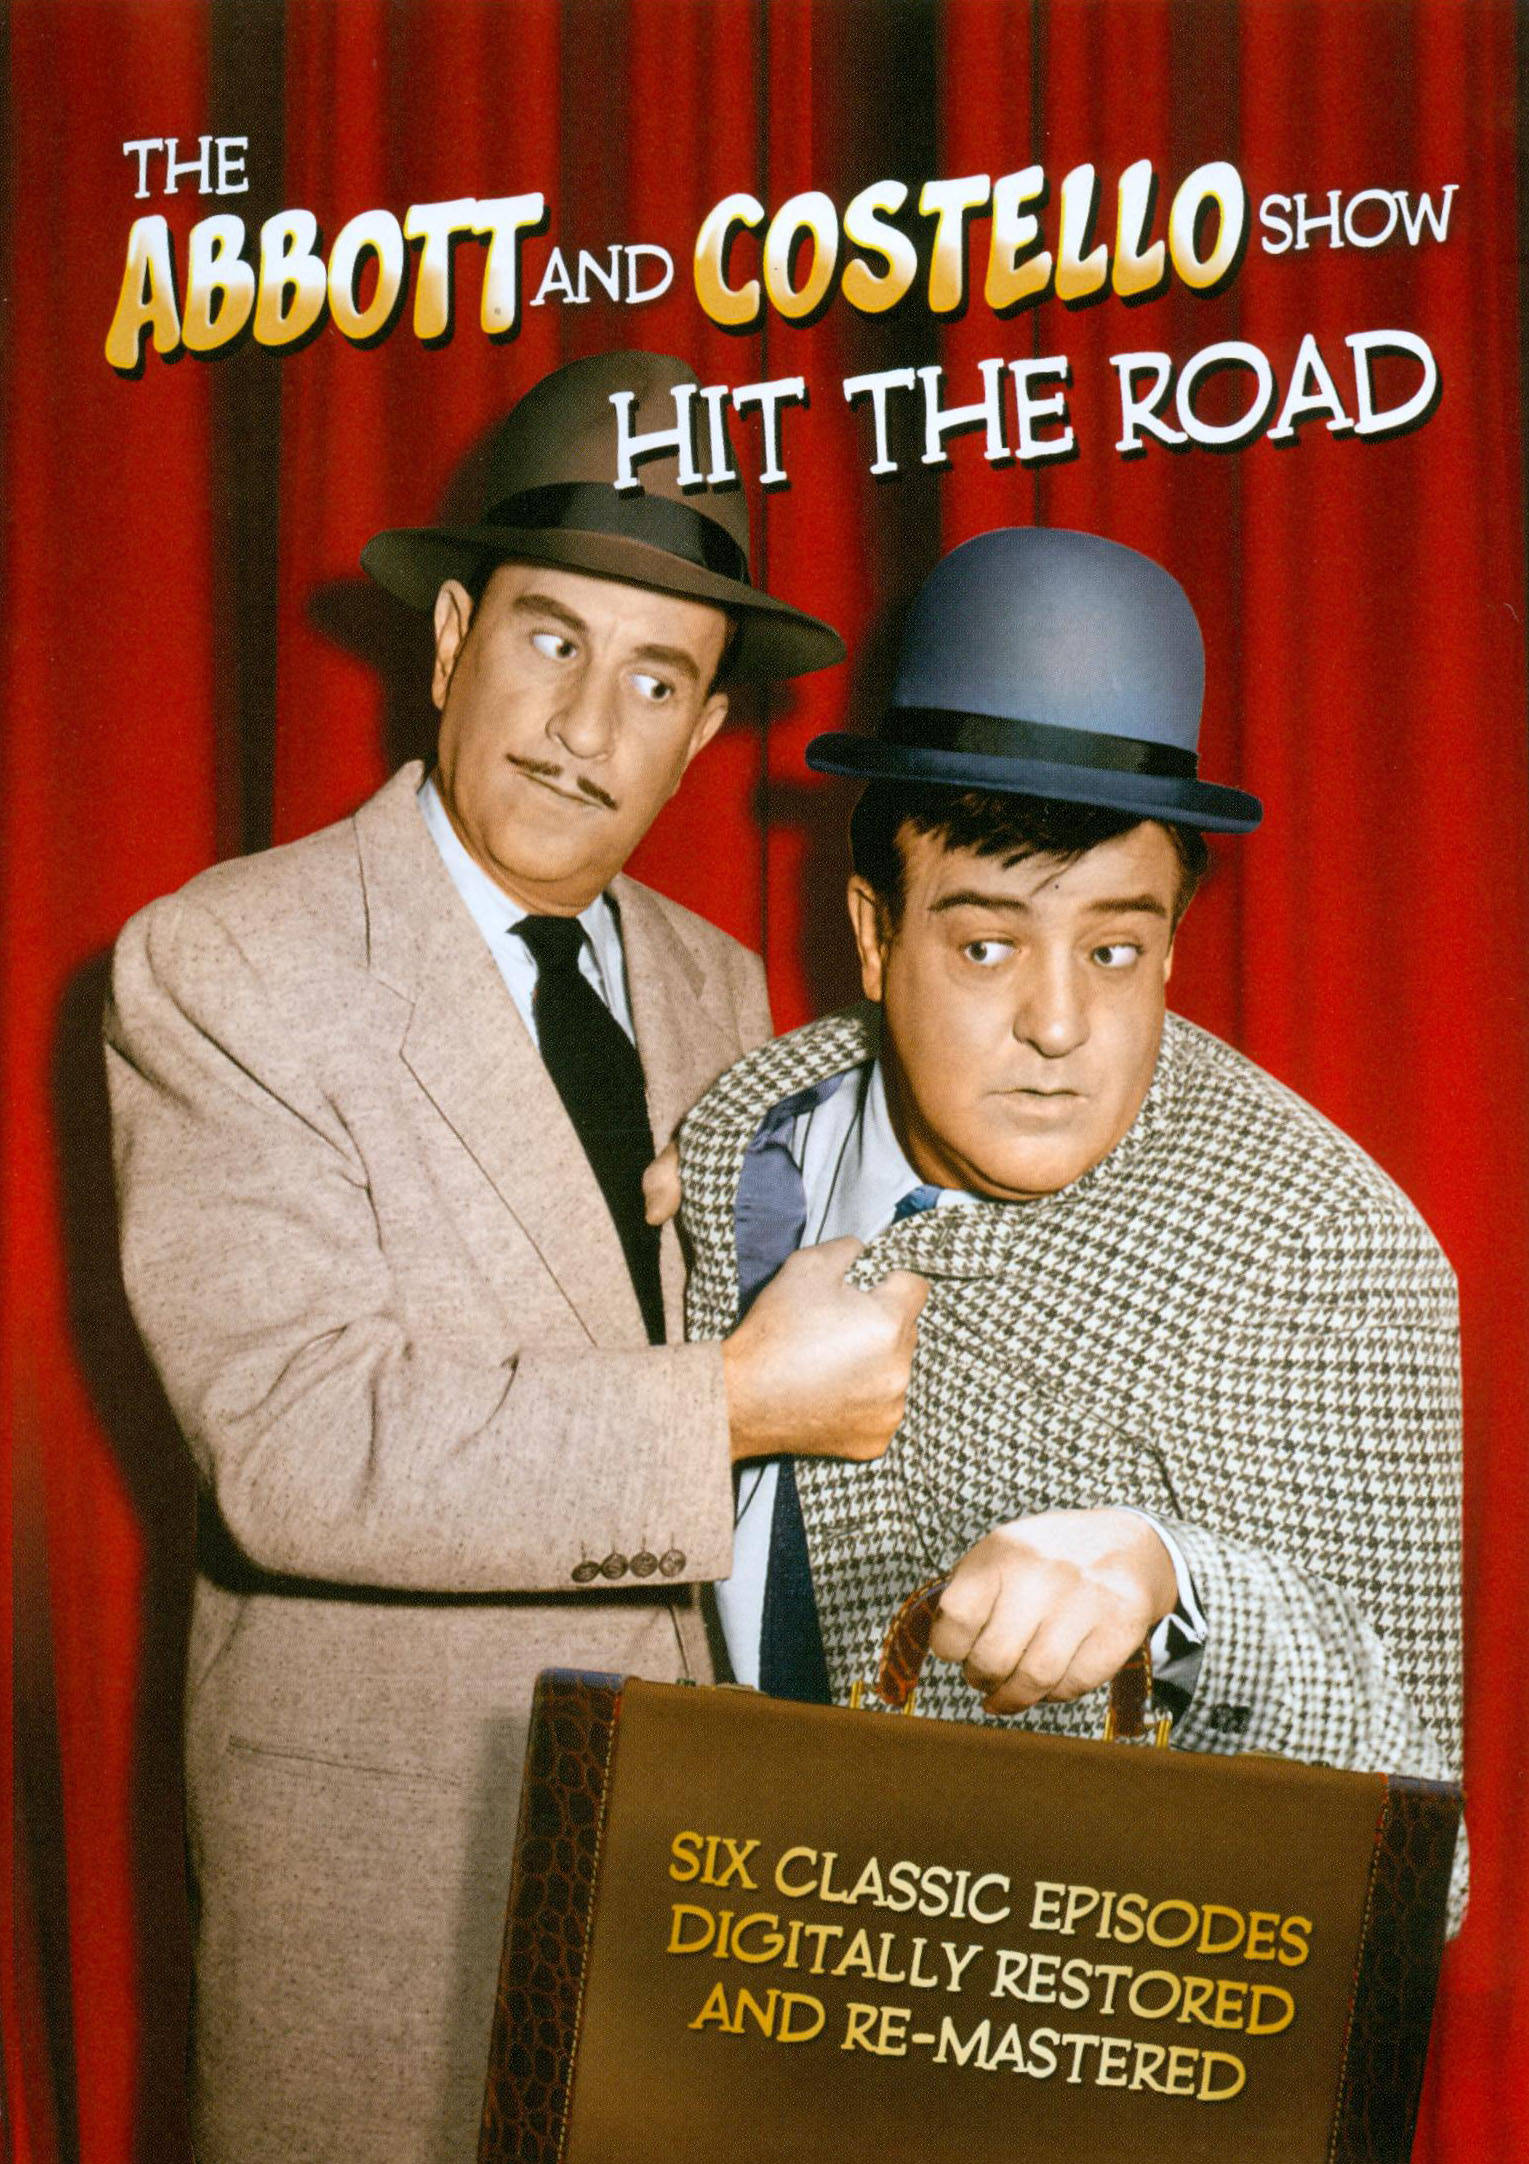 The Abbott and Costello Show: Hit the Road [DVD]